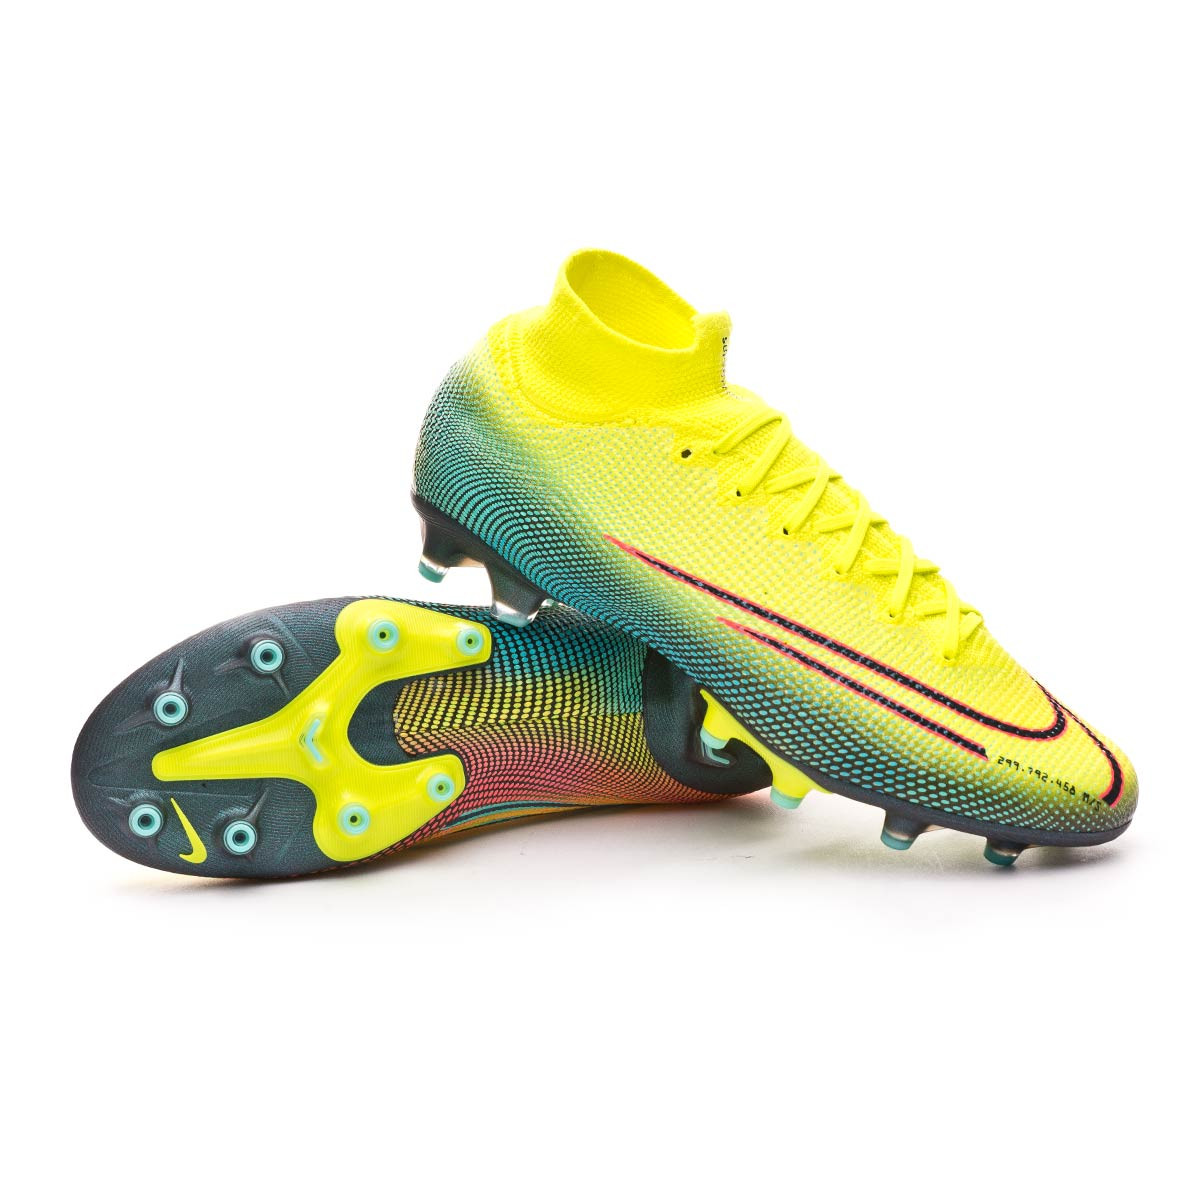 nike mds football boots